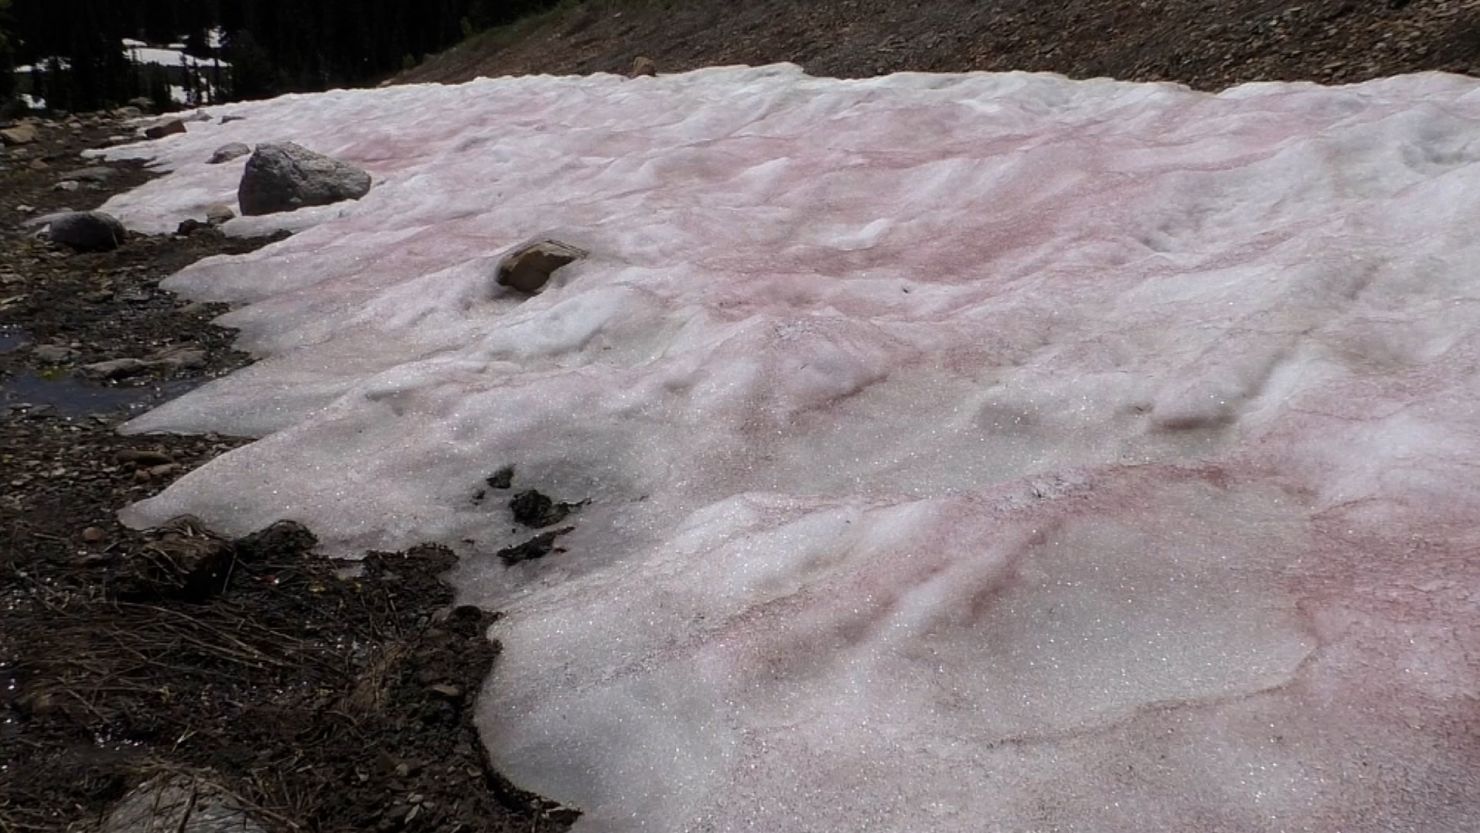 Snow in parts of Utah has appeared red in a phenomenon nicknamed "watermelon snow."